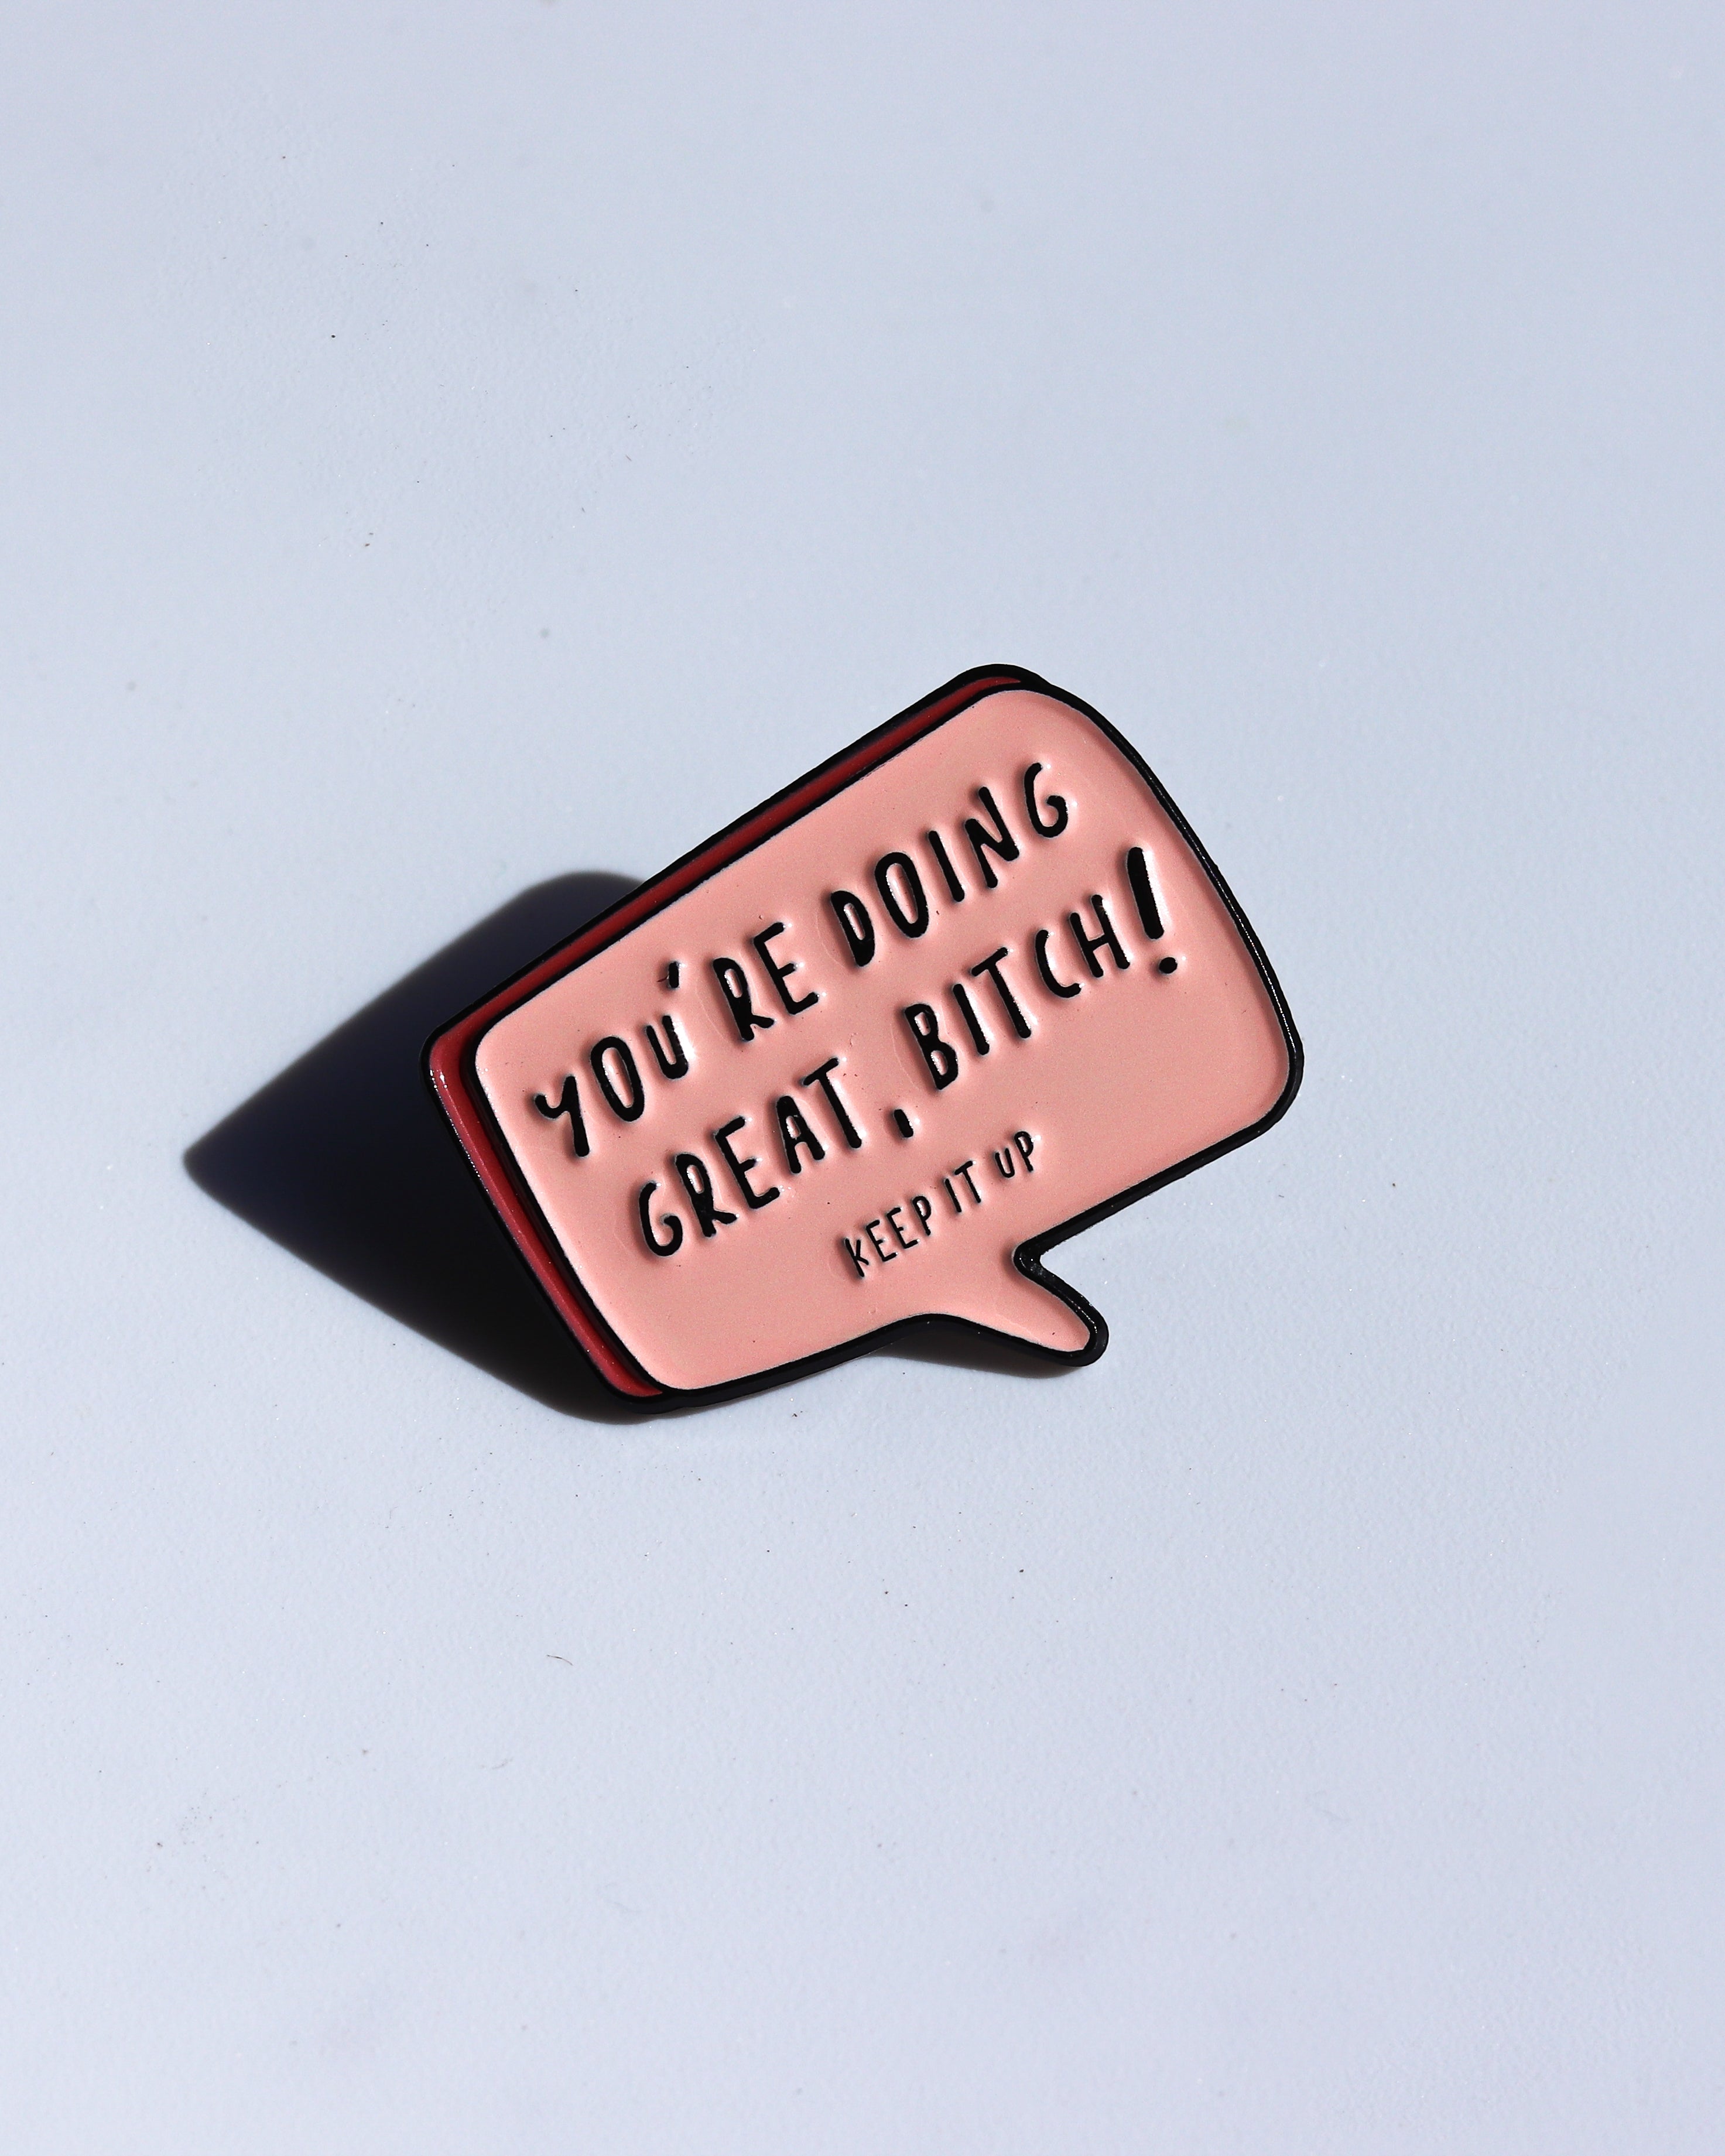 Motivational Pins - You're Doing Great!